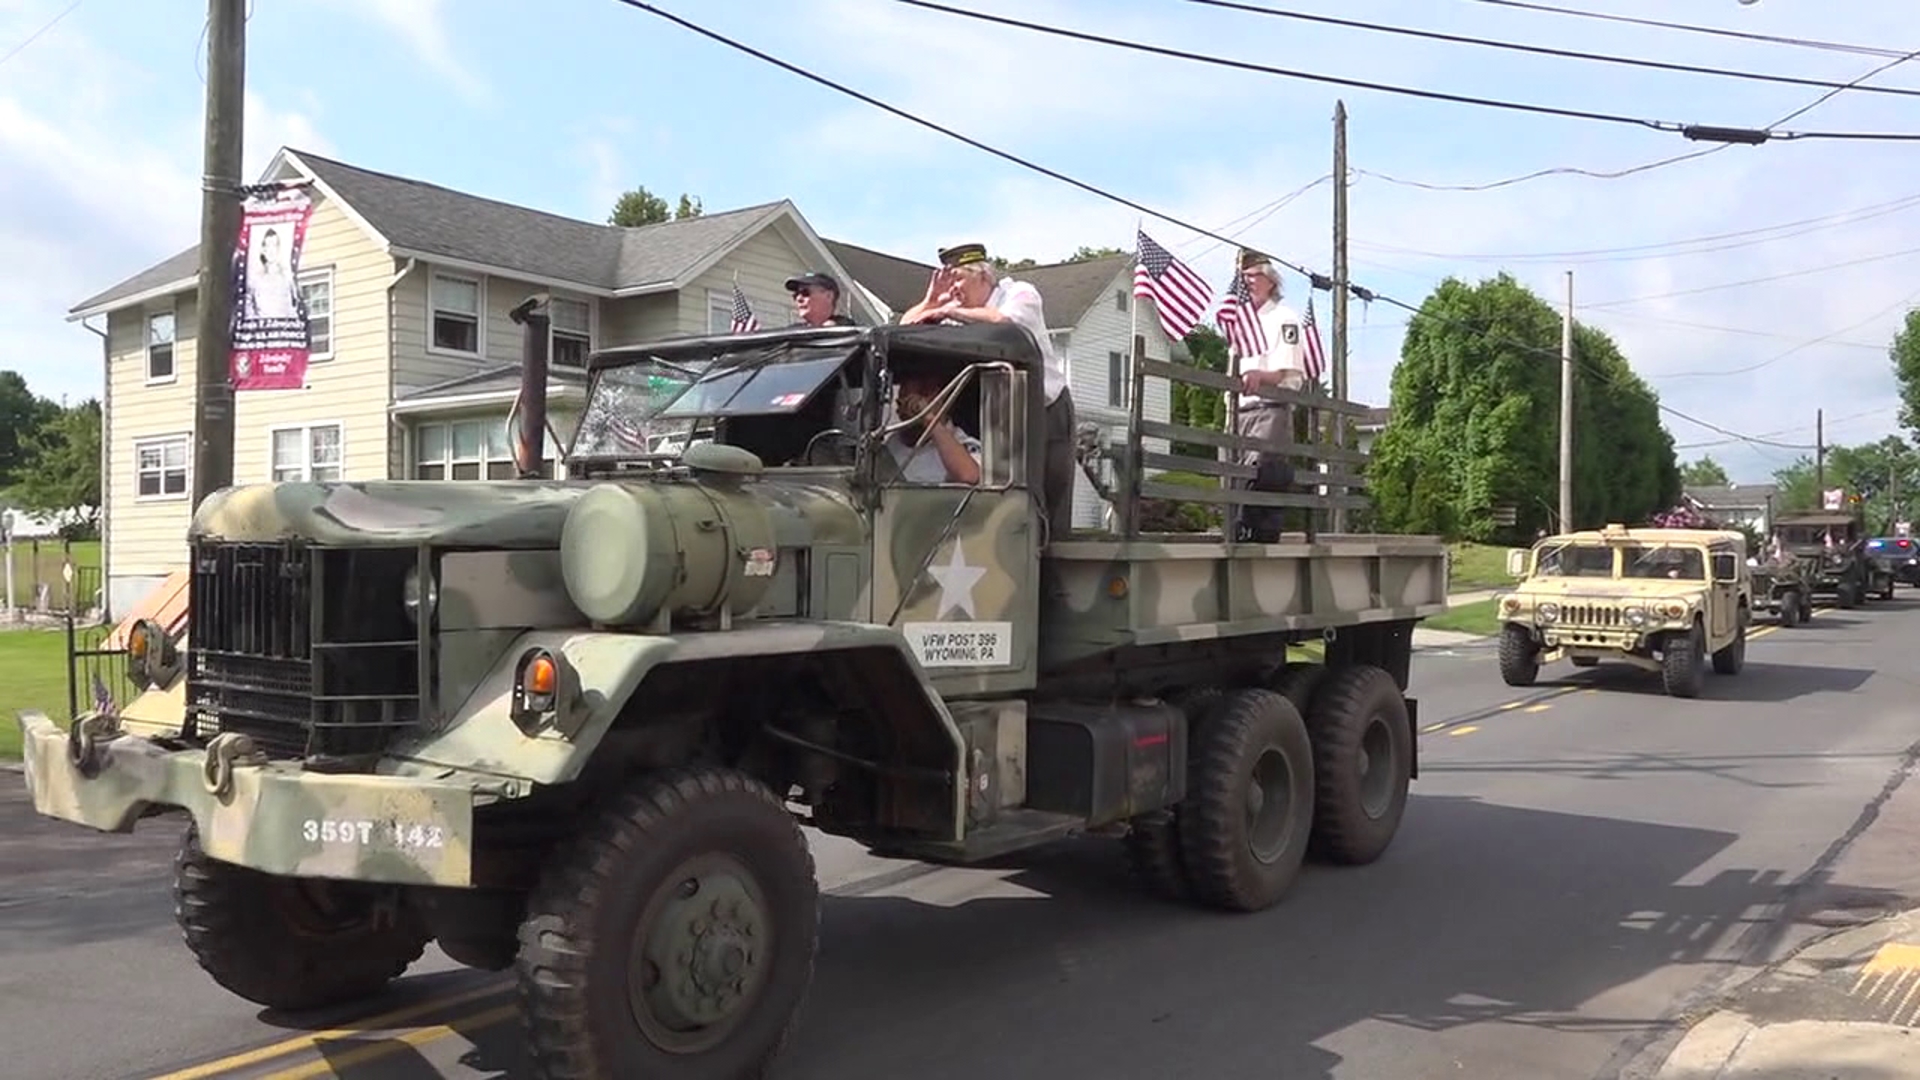 For some paradegoers in Luzerne County, honoring our fallen service members at an annual parade is a tradition that goes back more than 60 years.